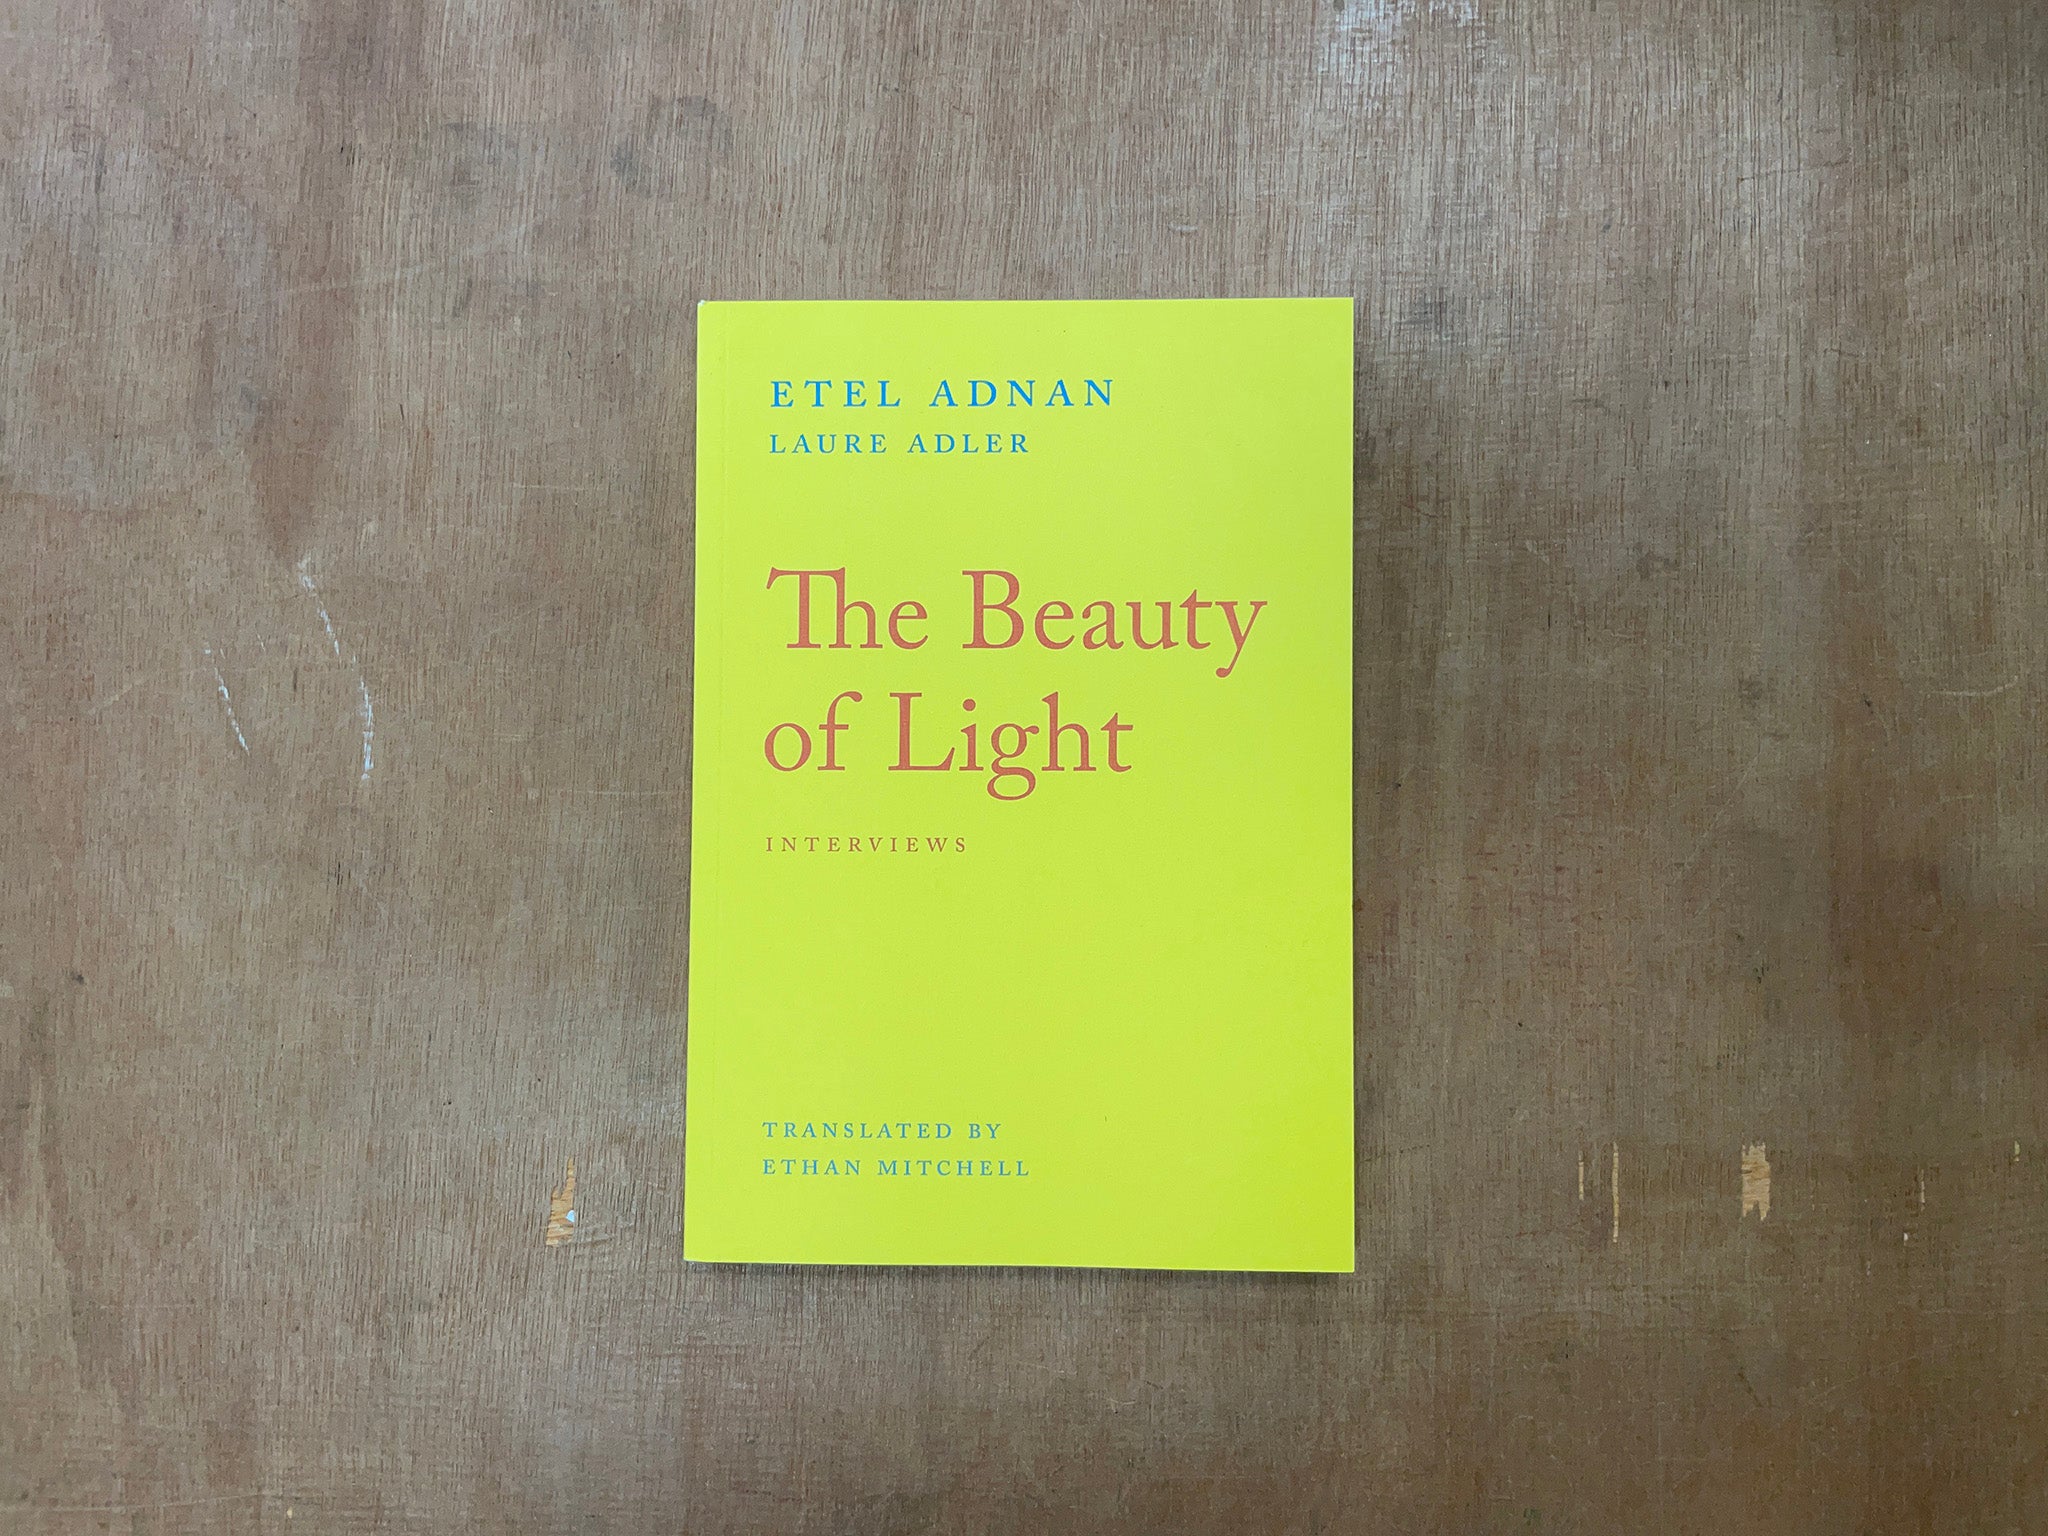 THE BEAUTY OF LIGHT: INTERVIEWS WITH ETEL ADNAN by Laure Adler